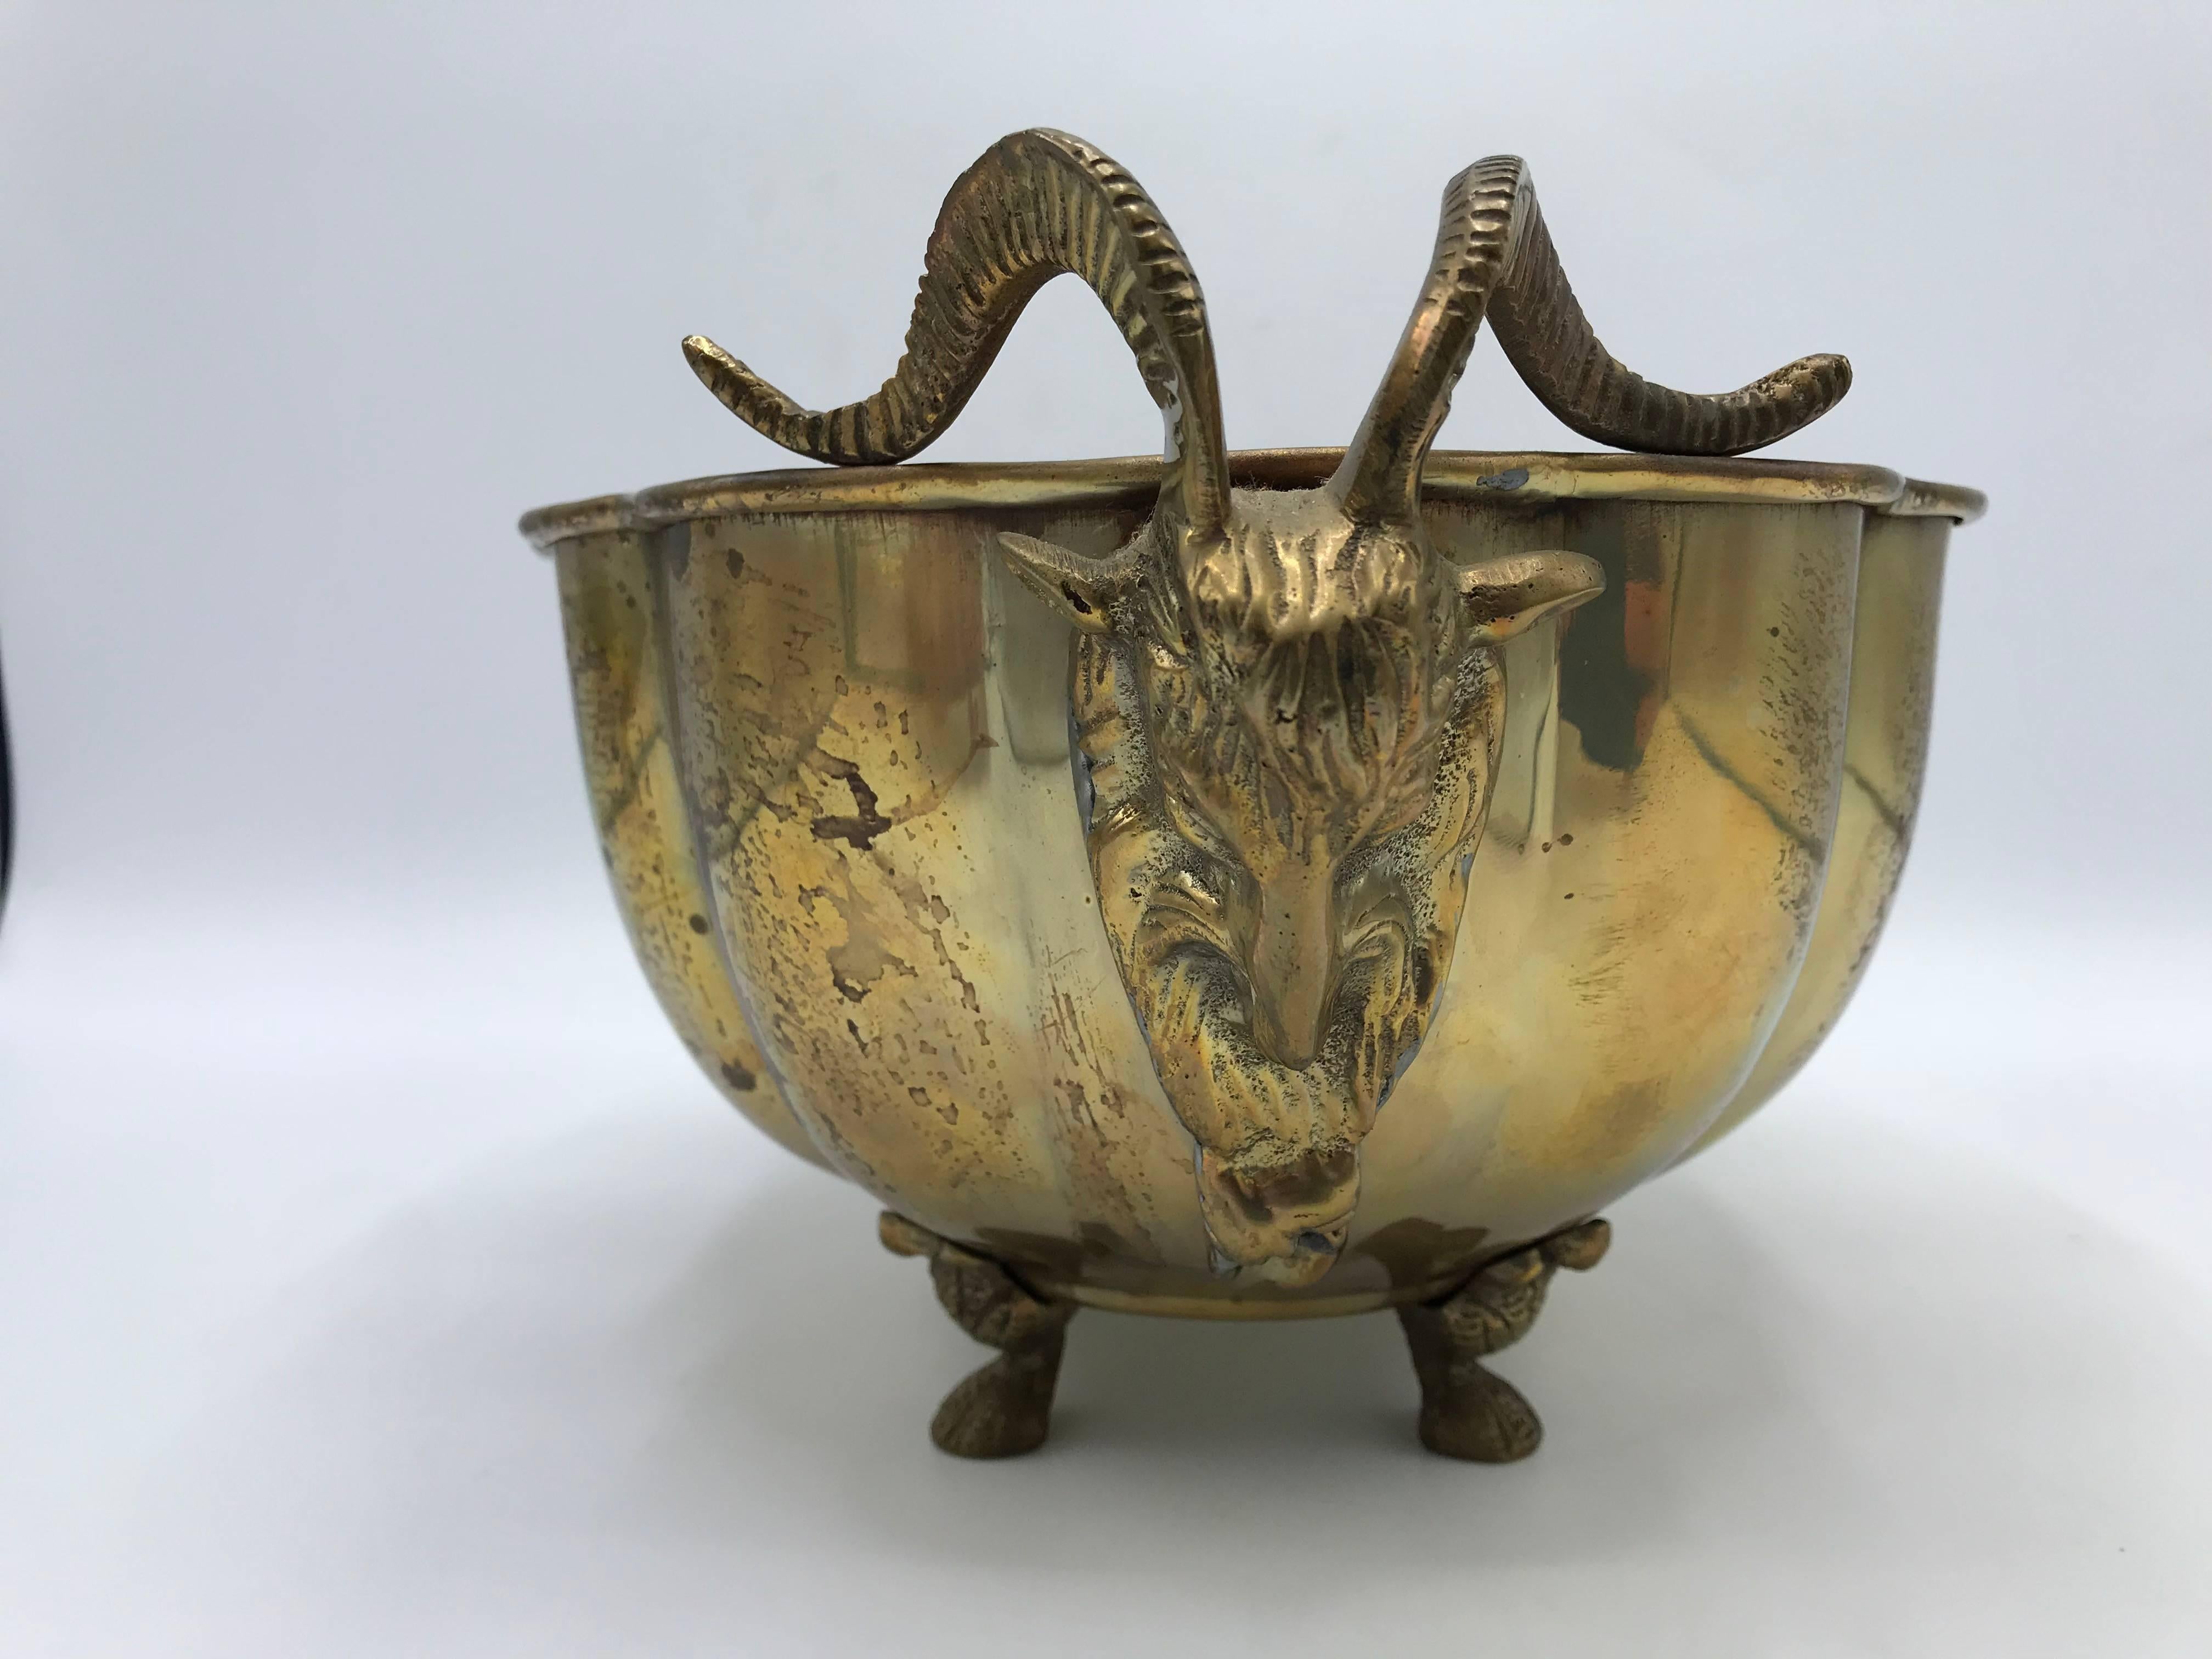 20th Century 1960s Italian Brass Scalloped Cachepot Bowl with Rams Head Motif